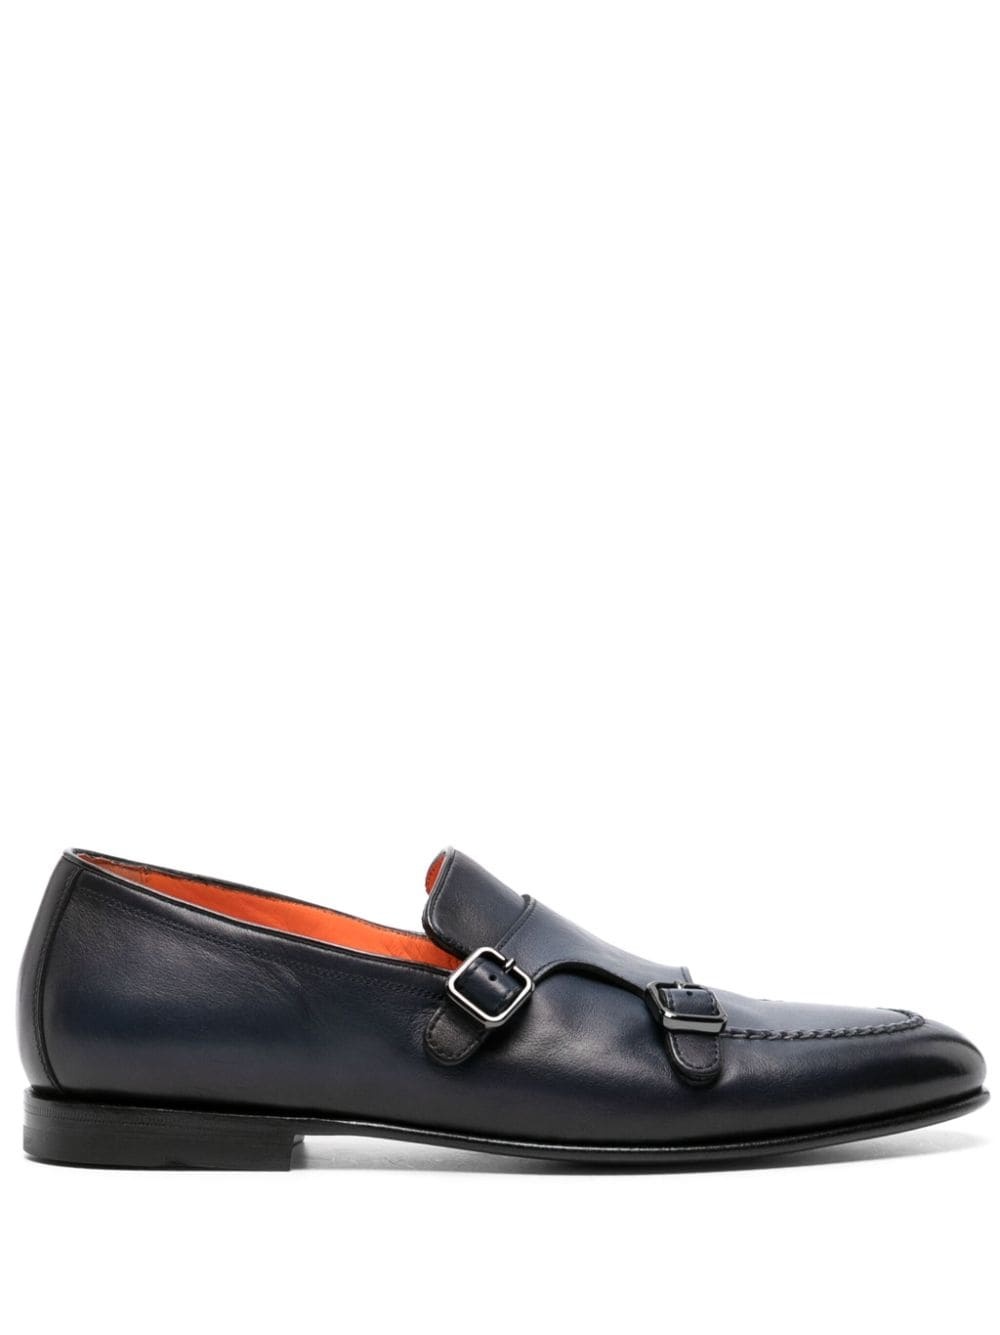 double-buckle leather monk shoes - 1